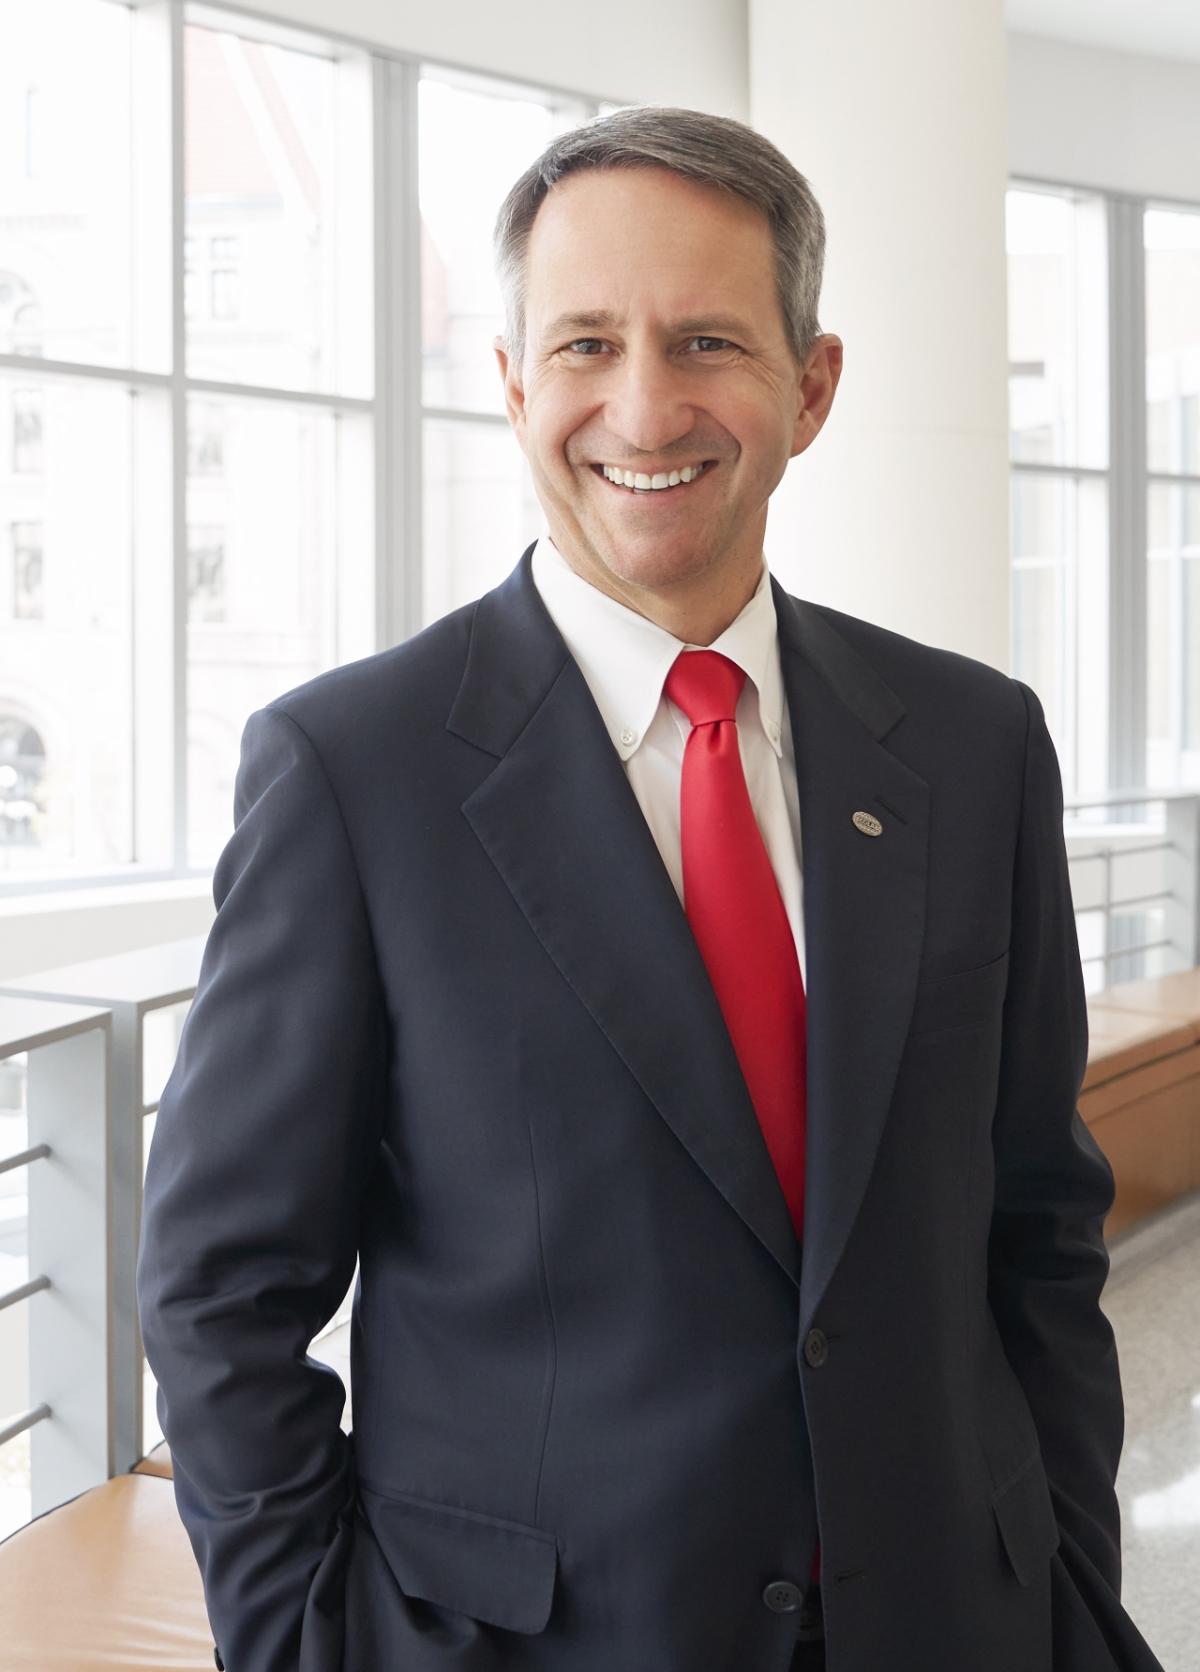 Photo of Christophe Beck, Ecolab President and CEO.